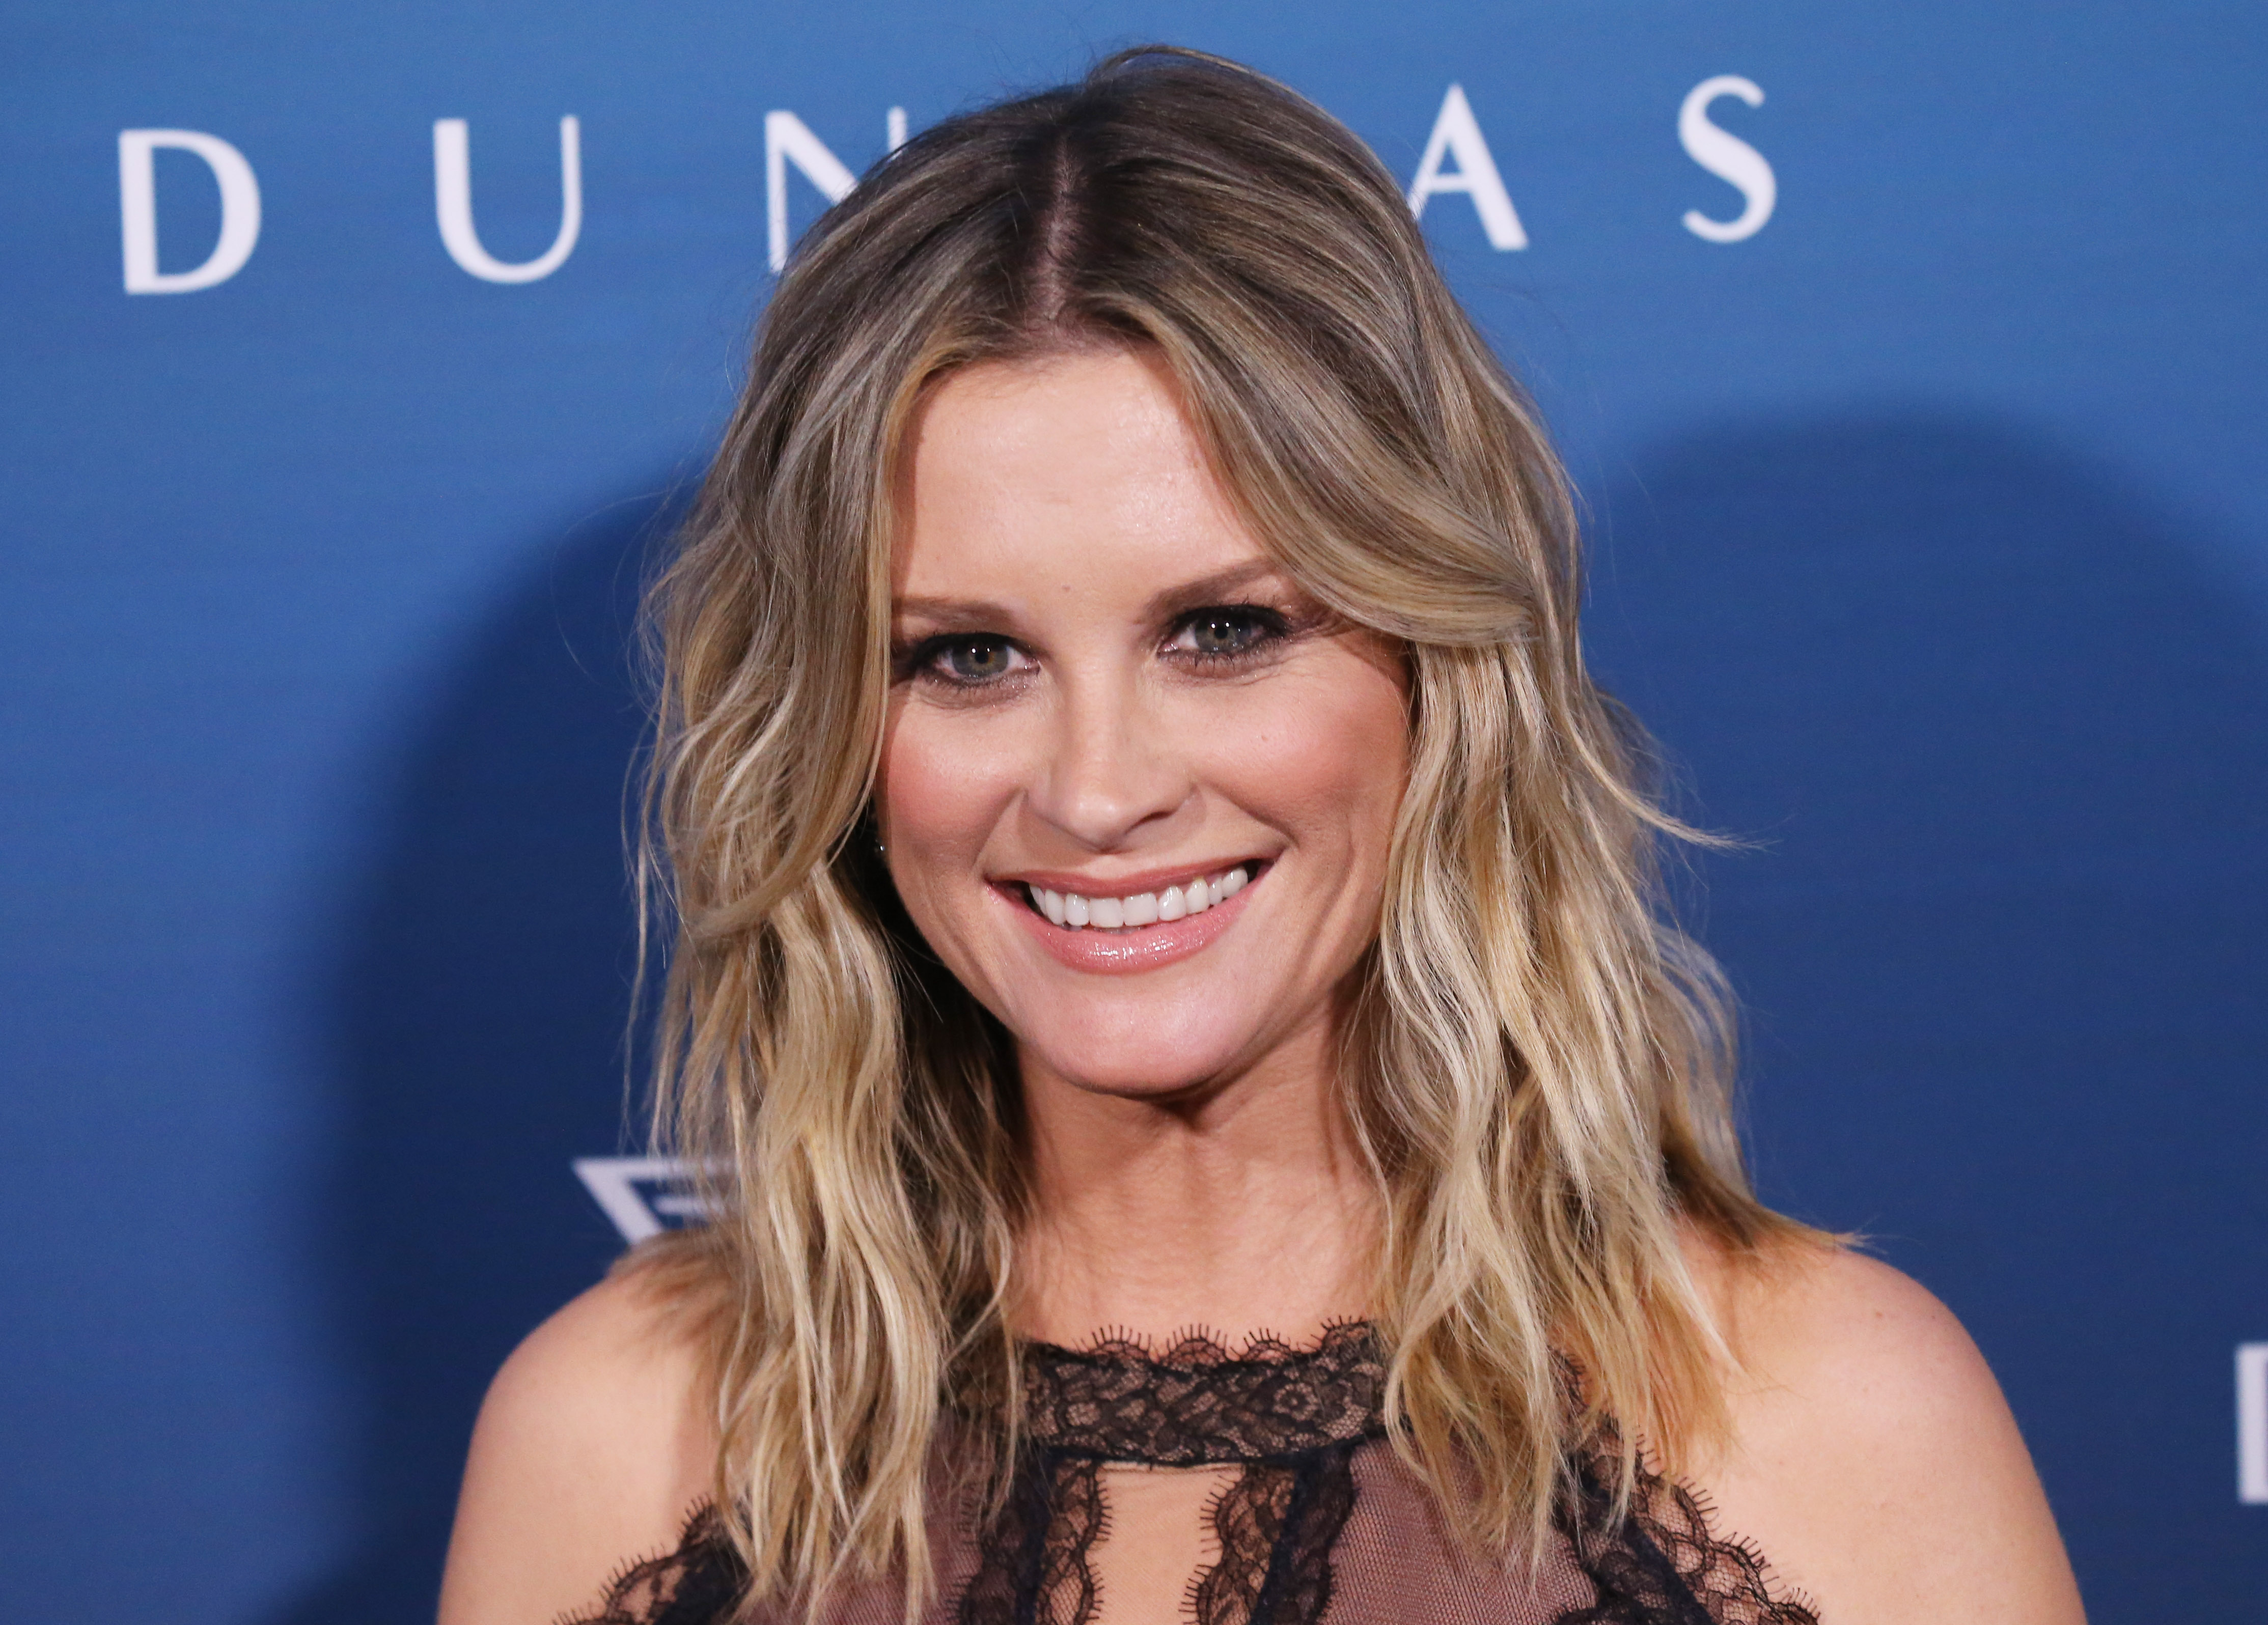 Bonnie Somerville at The Art Of Elysium's 12th Annual Celebration in 2019, in Los Angeles, California. | Source: Getty Images